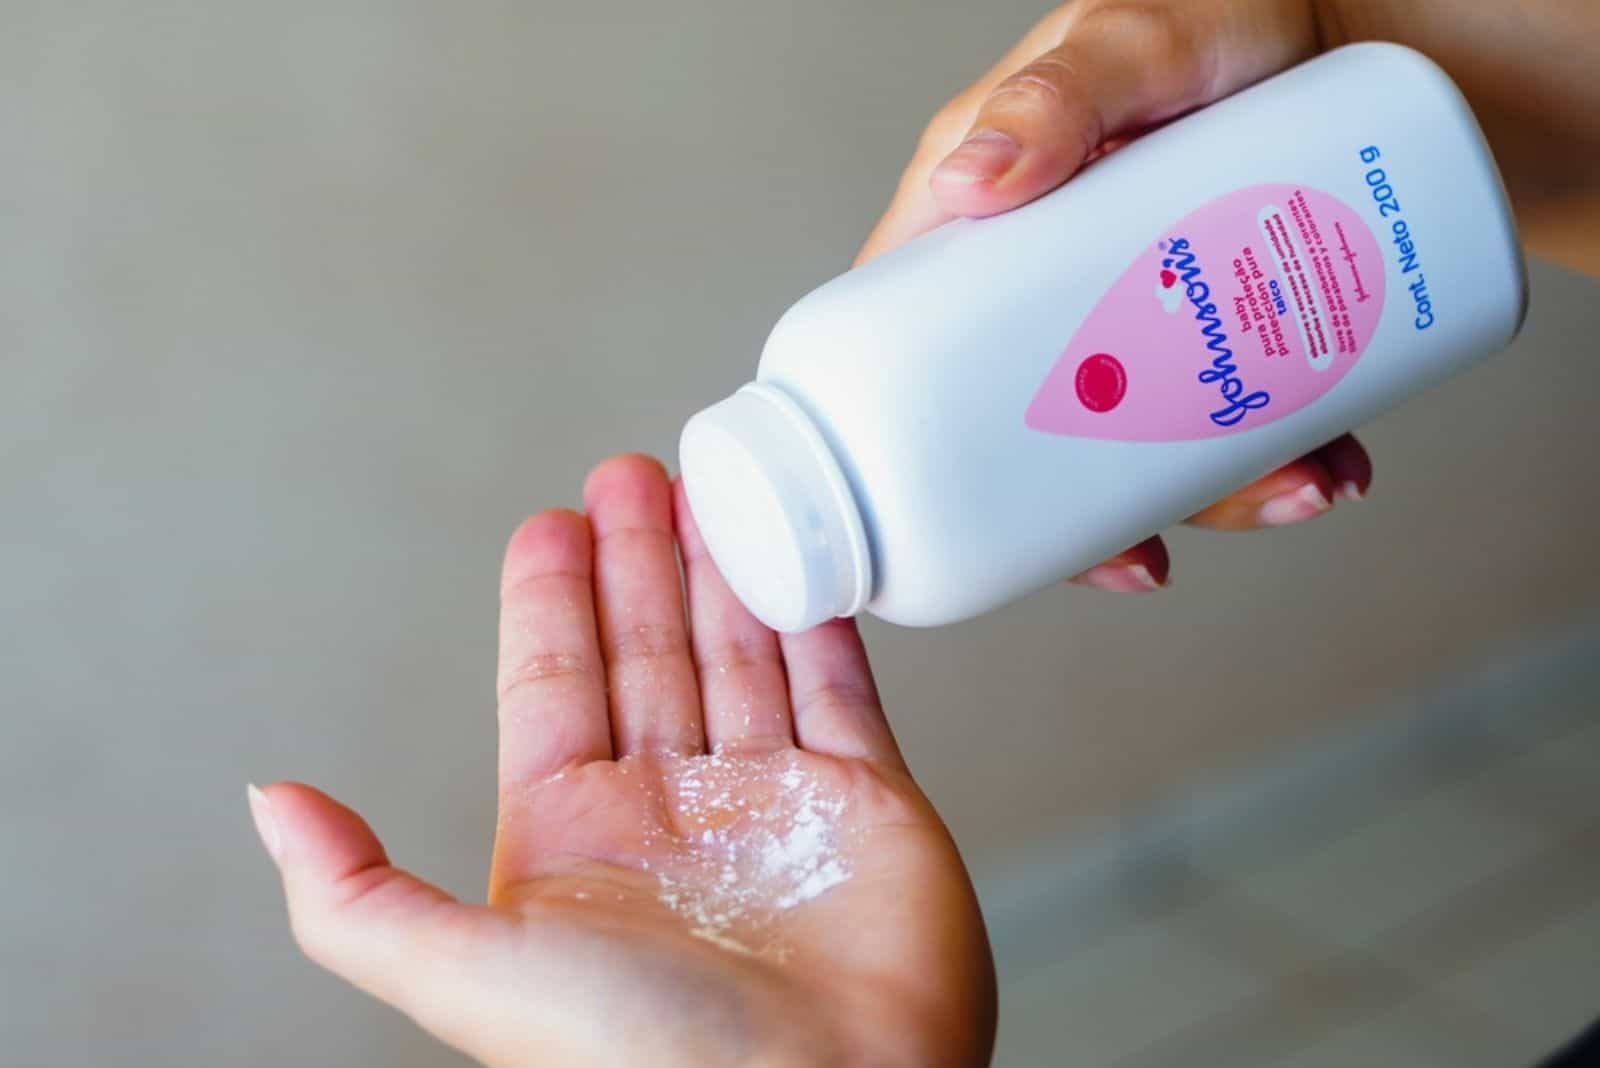 a woman puts baby powder on her hand